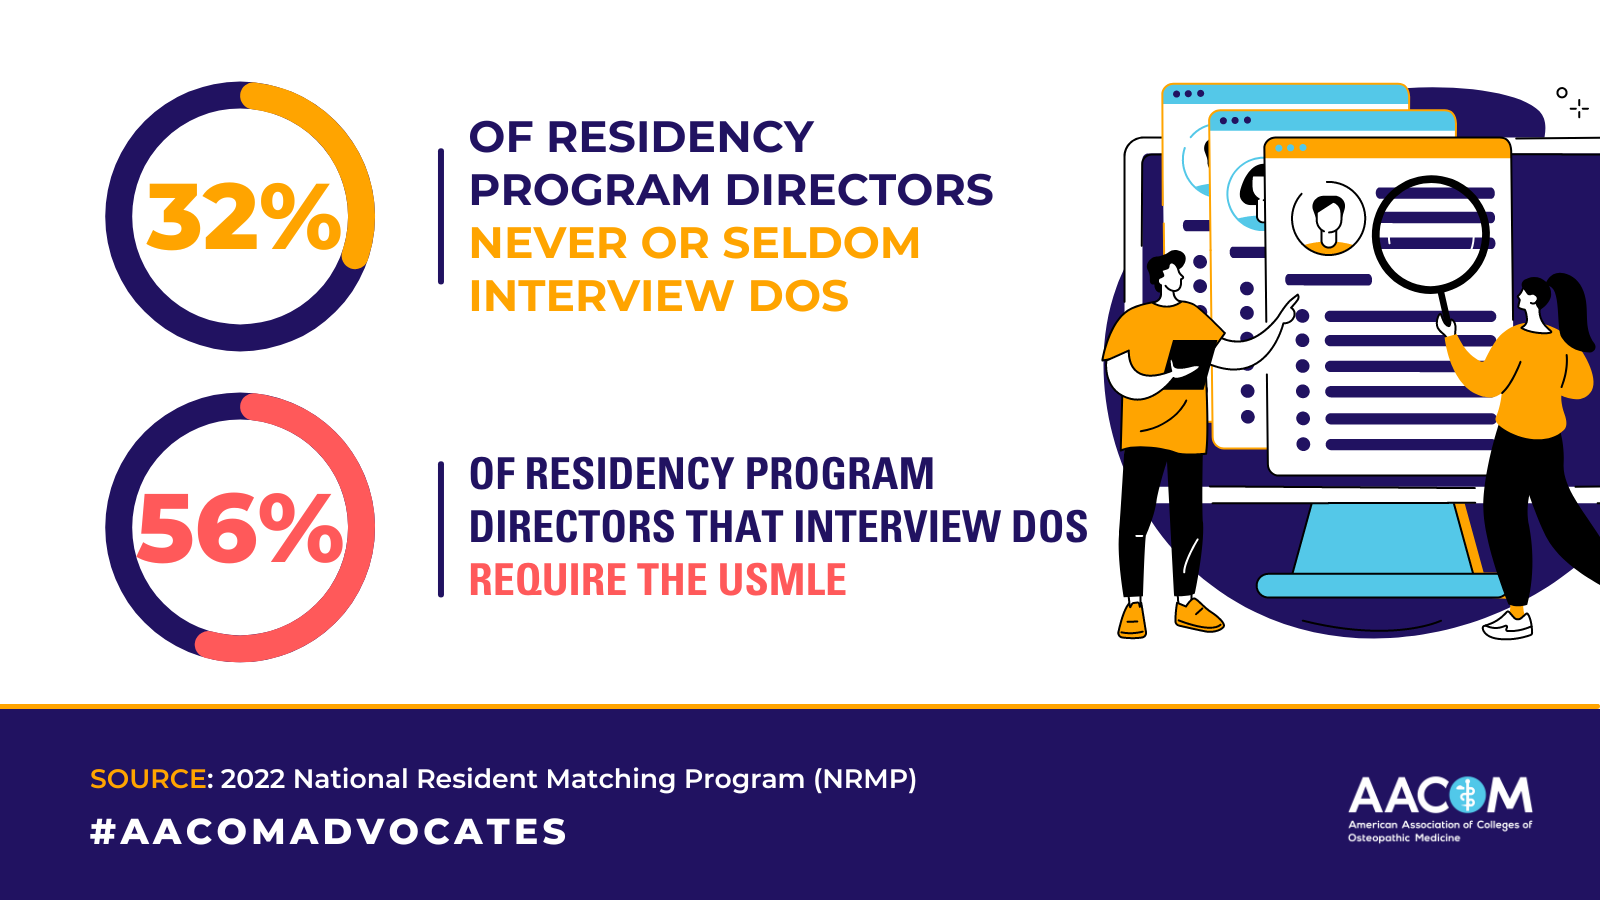 32% of residency program directors never or seldom interview DO students, 56% of residency program directors that interview DOs require the USMLE